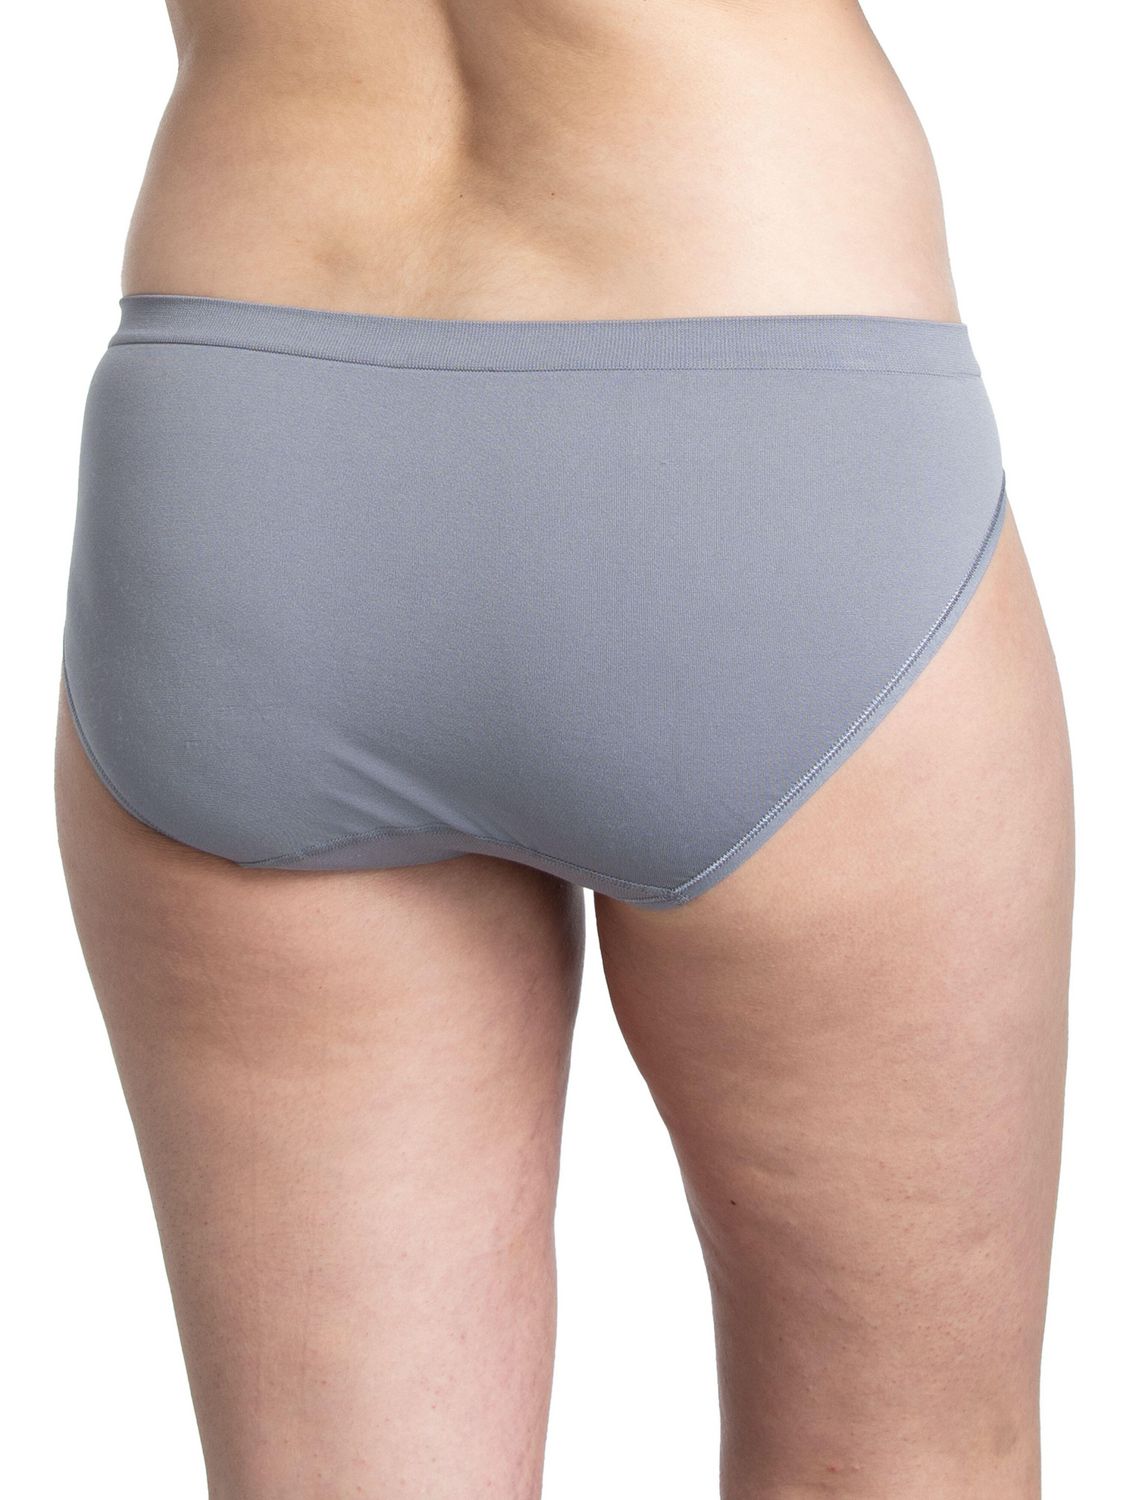 Best Fruit Of The Loom Seamless Underwear Size 10/12 for sale in Calgary,  Alberta for 2024